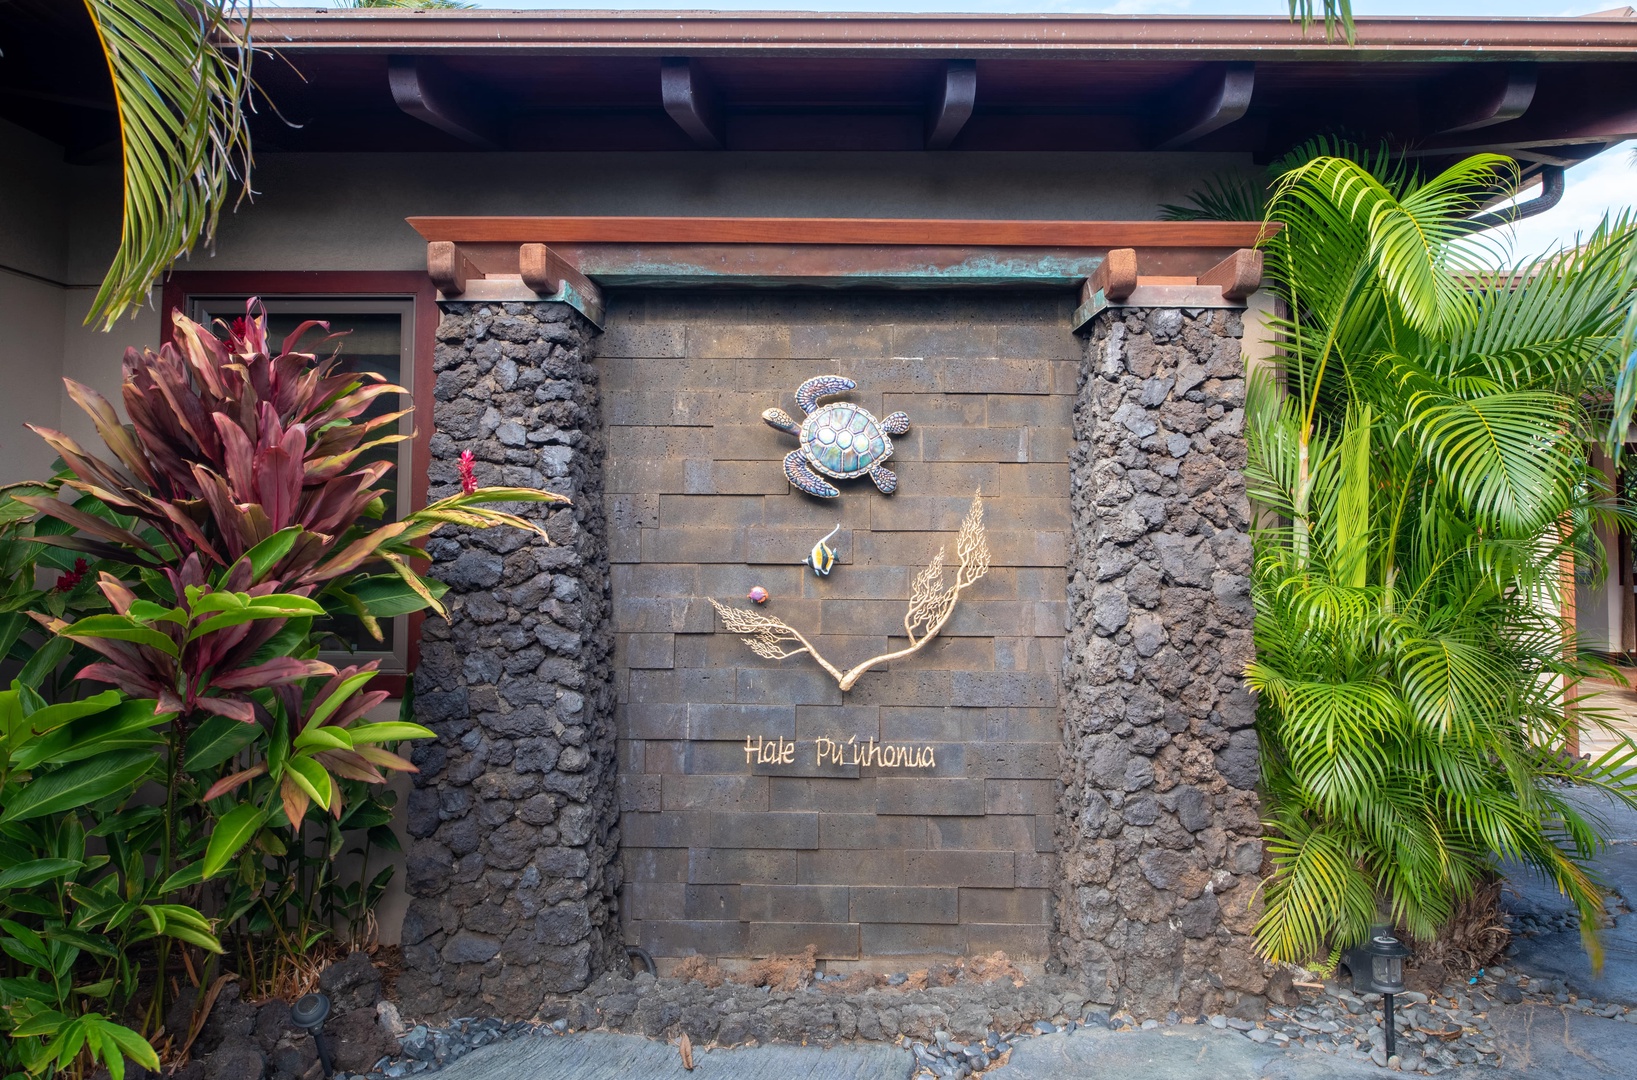 Kamuela Vacation Rentals, House of the Turtle at Champion Ridge, Mauna Lani (CR 18) - Courtyard Entry Art Piece.